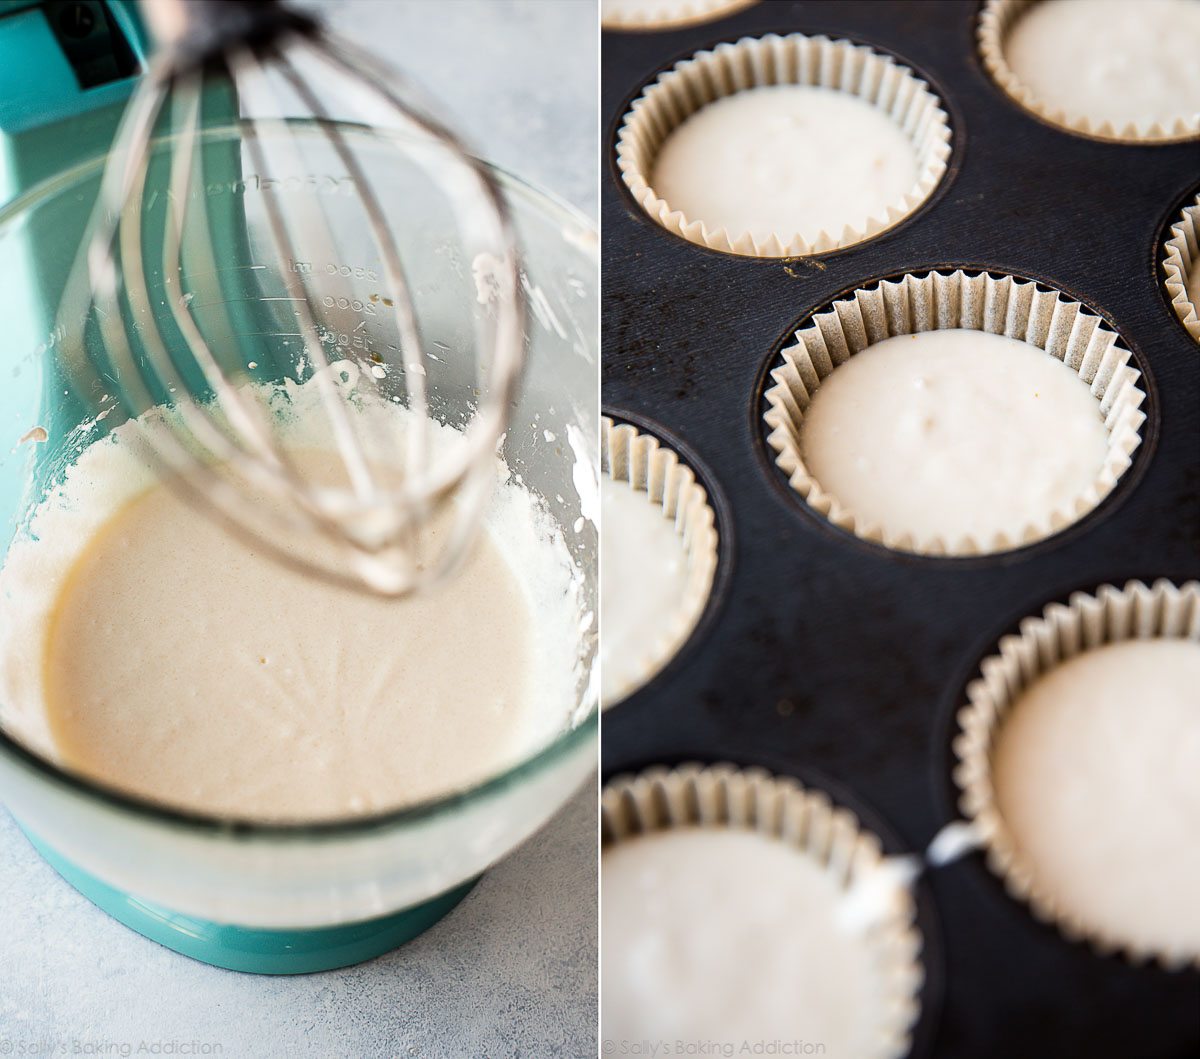 2 images of coconut cupcake batter in a glass stand mixer bowl and batter in a cupcake pan